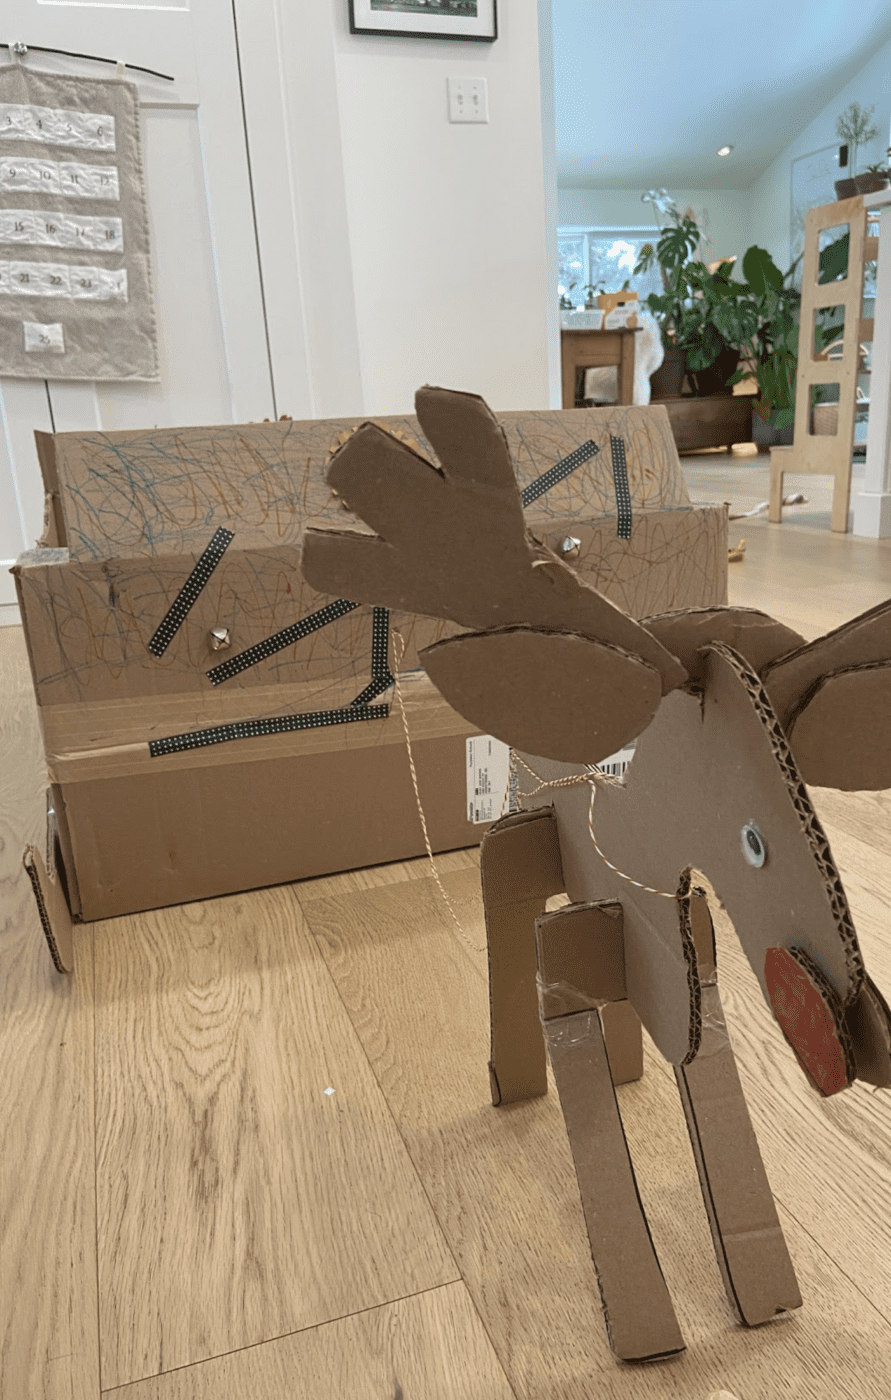 A reindeer and sleigh made out of cardboard boxes.